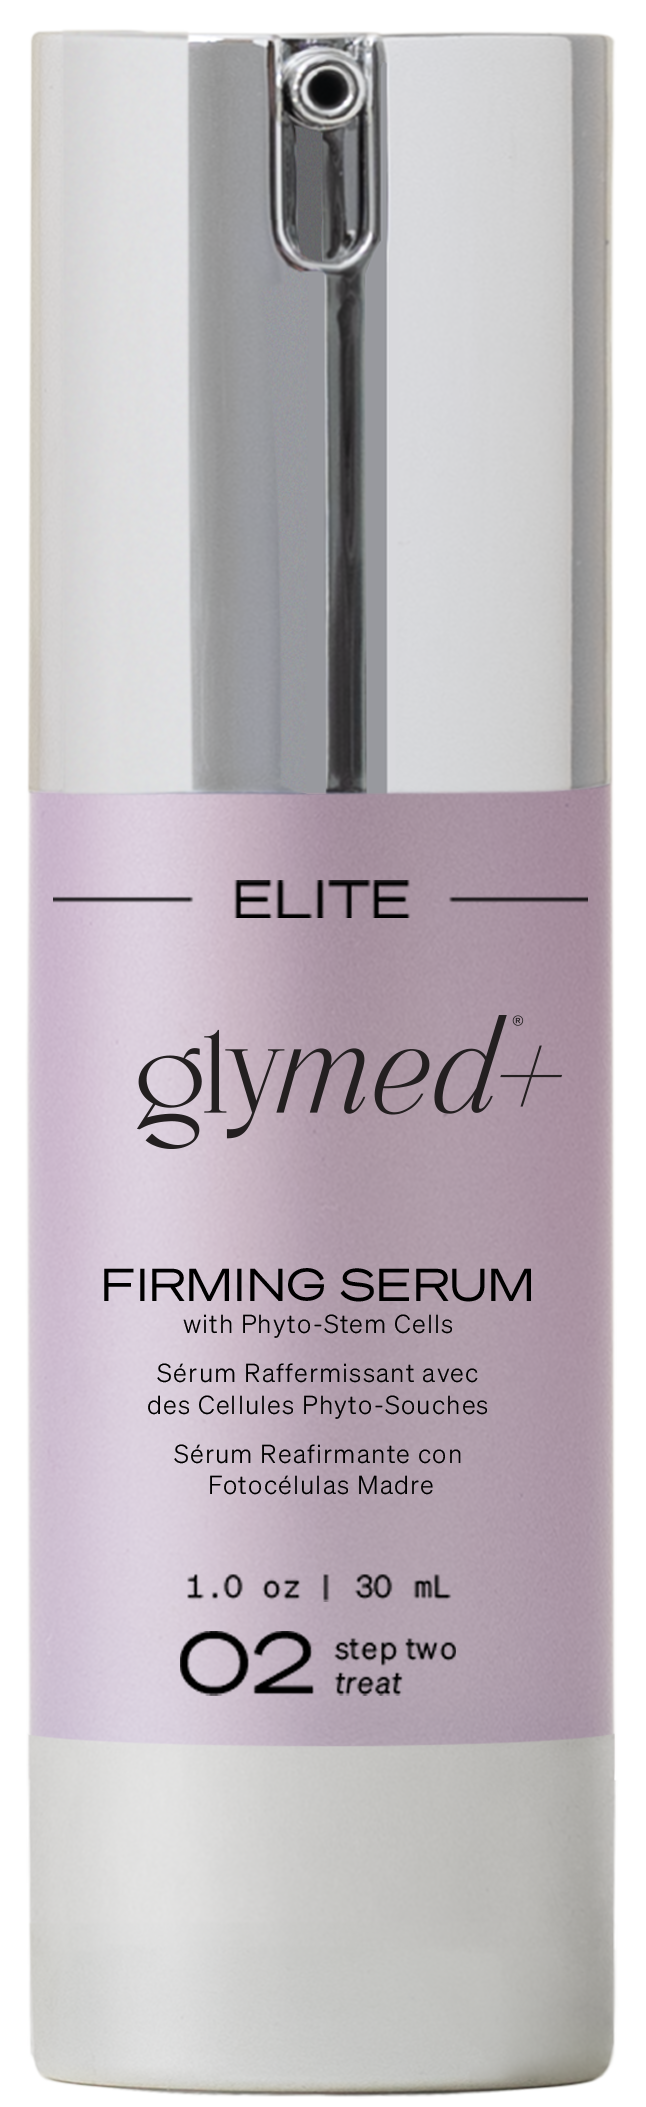 Firming Serum with Phyto Stem Cells